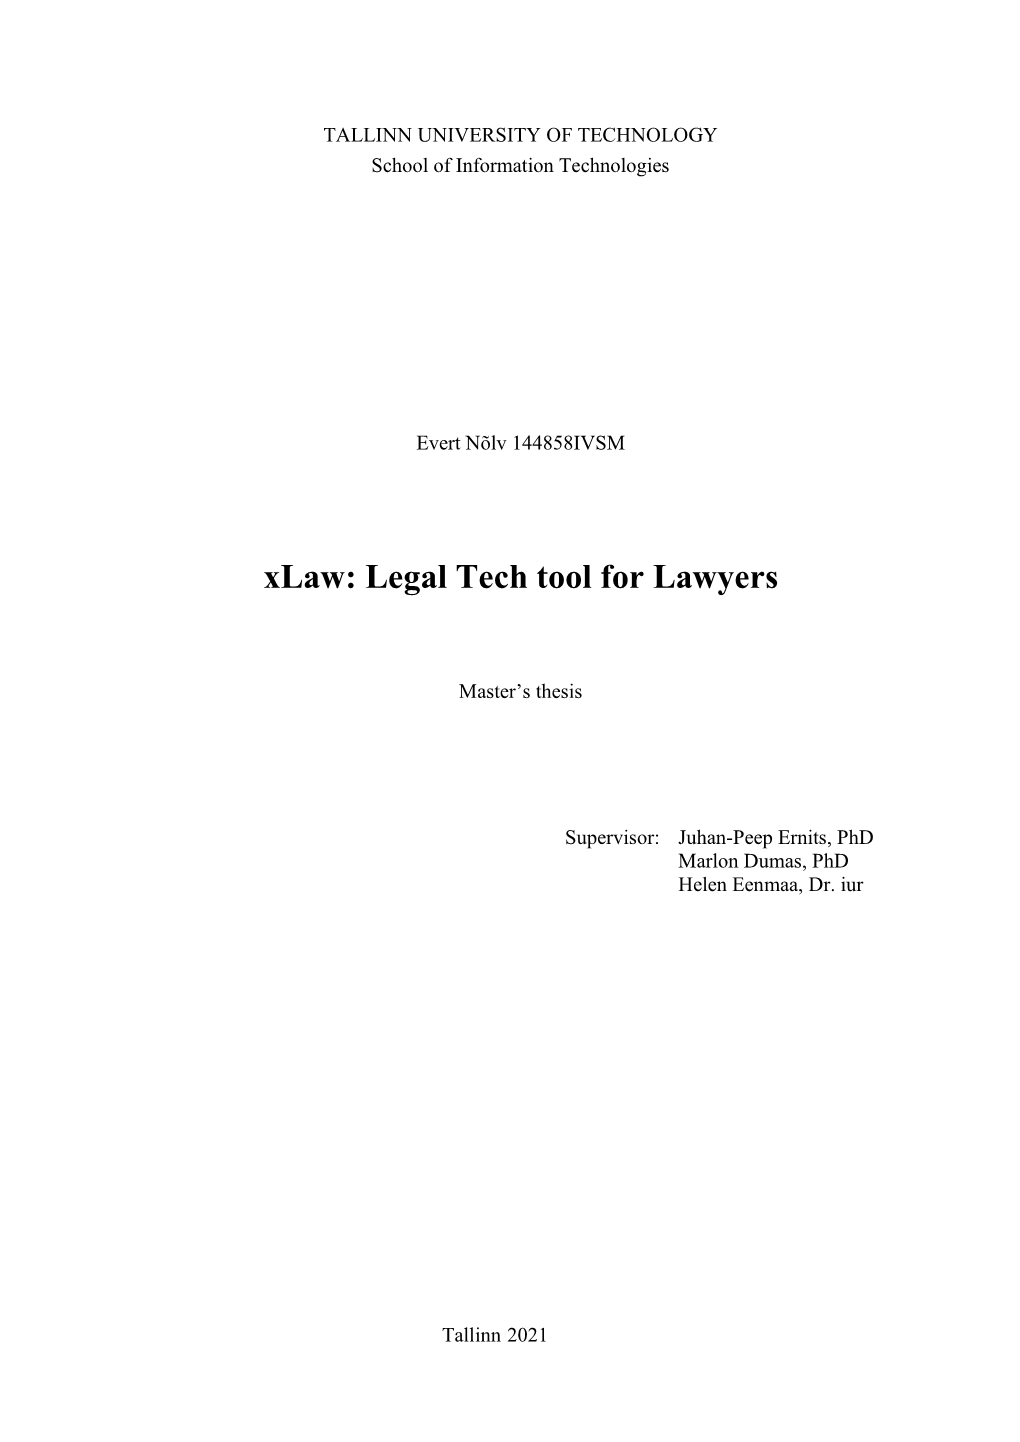 Legal Tech Tool for Lawyers